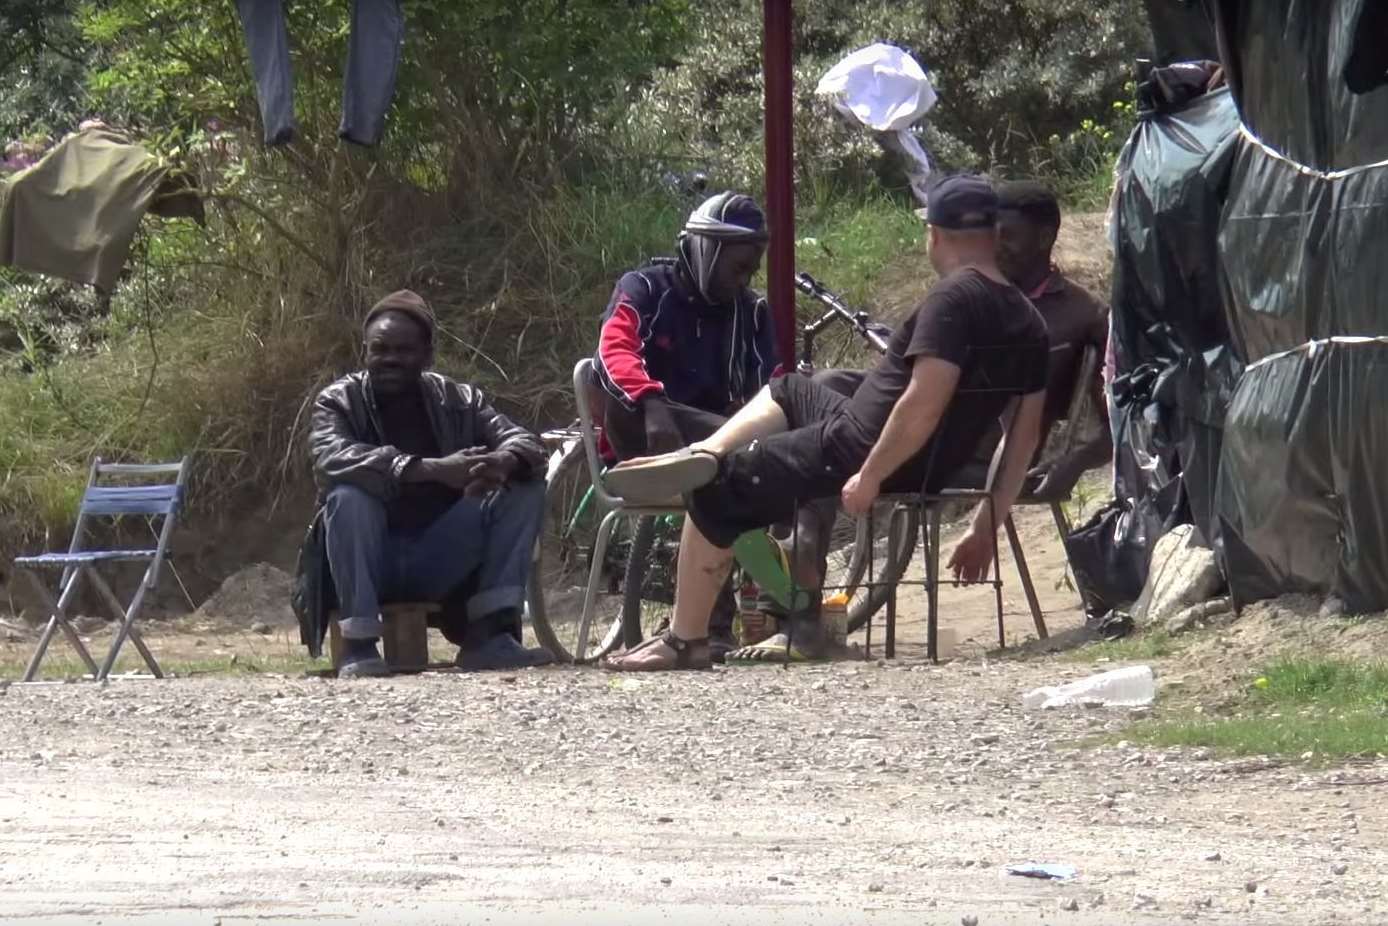 Migrants at the camp in Calais, near the Eurotunnel terminal